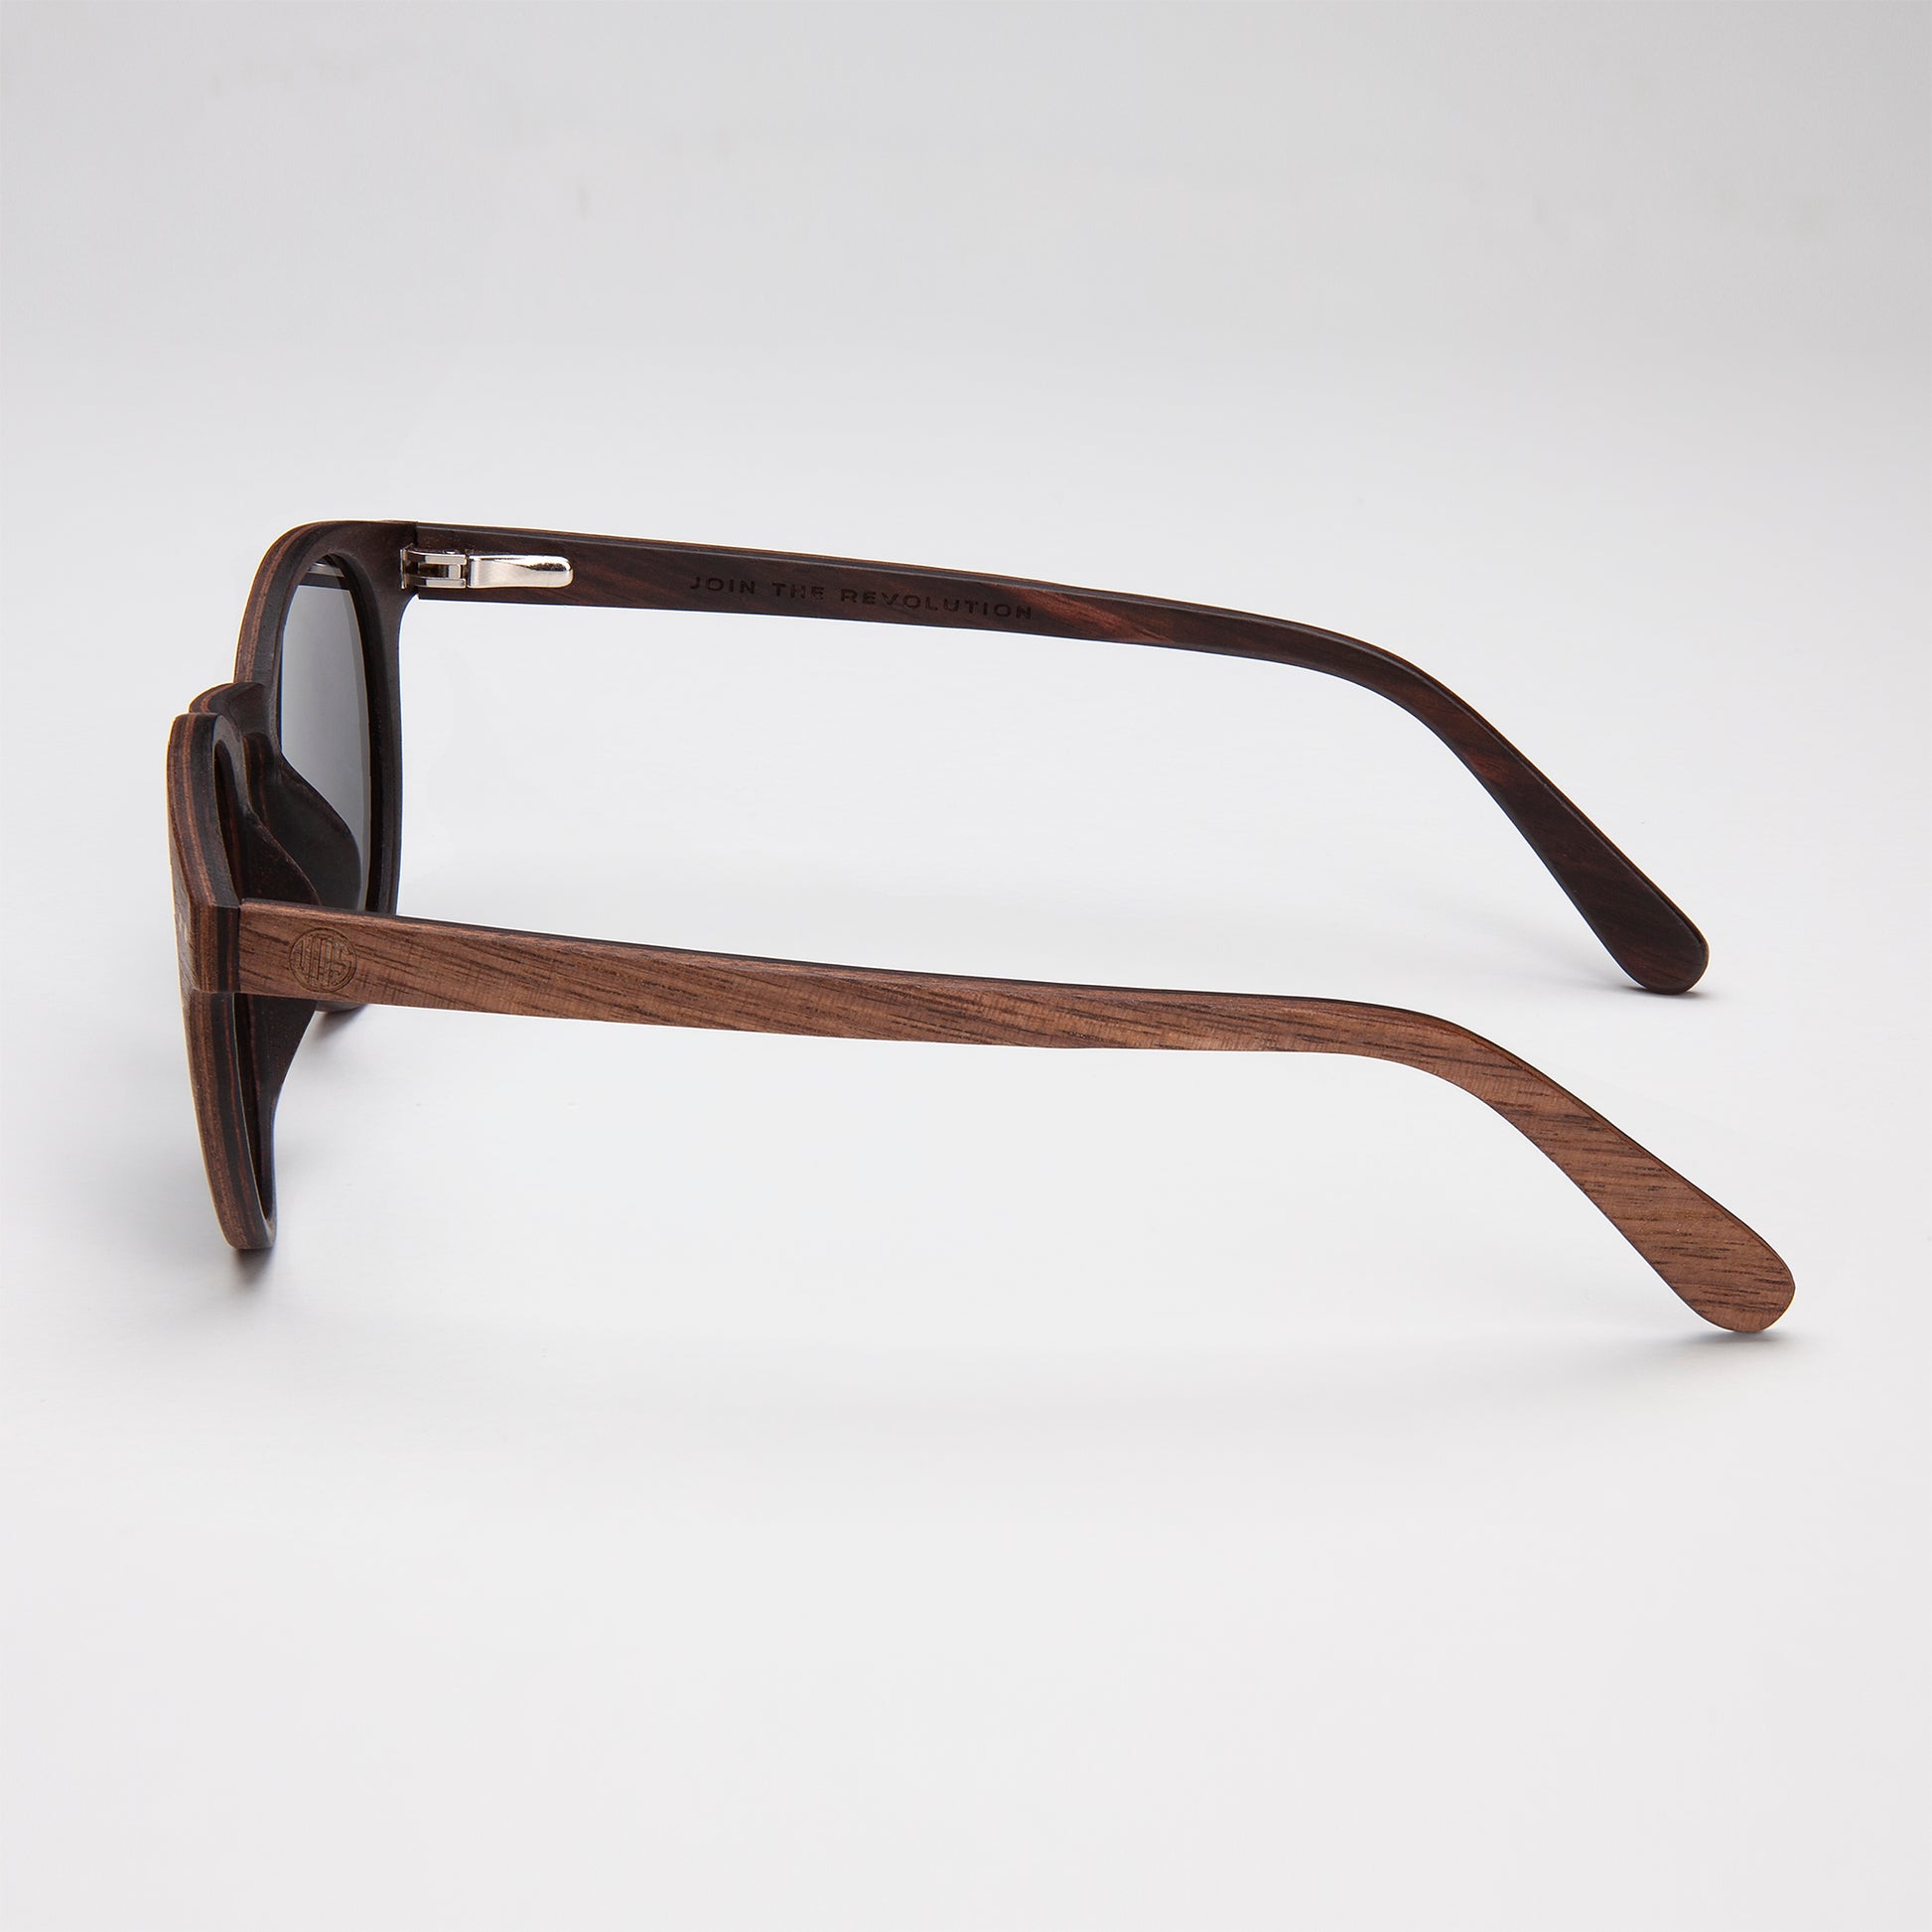 Eco Friendly Sunglasses Wooden Sunglasses for men and womens. Featuring a high quality TAC polarised Lens. Side view of wooden sunglasses arm.